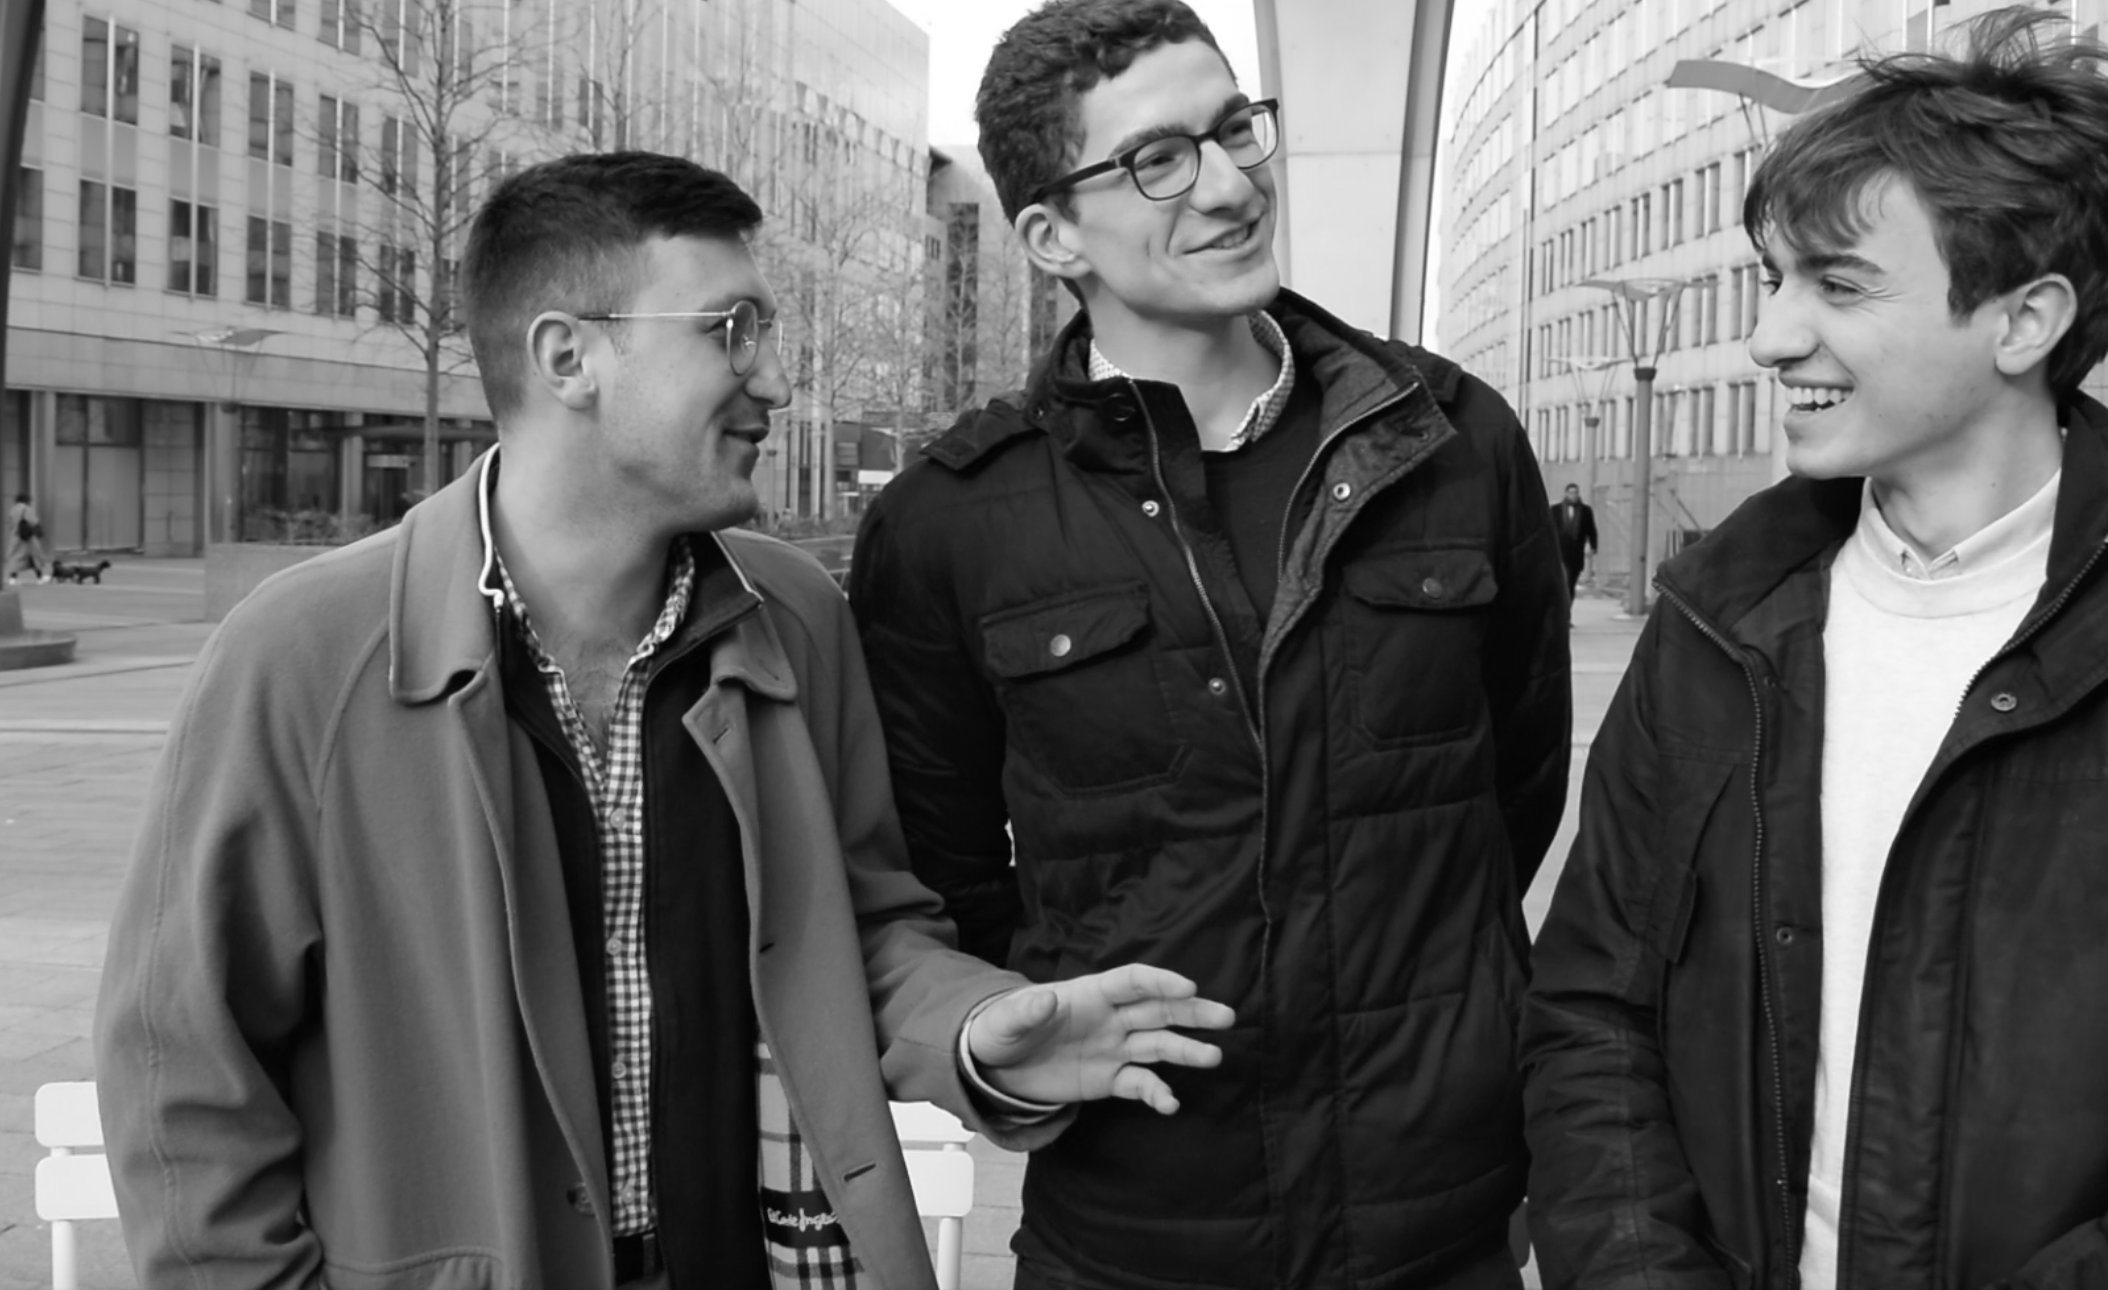 The three initiators of the ECI (Timo, Tassos and Sandro) are pictured while talking to each other in a street.